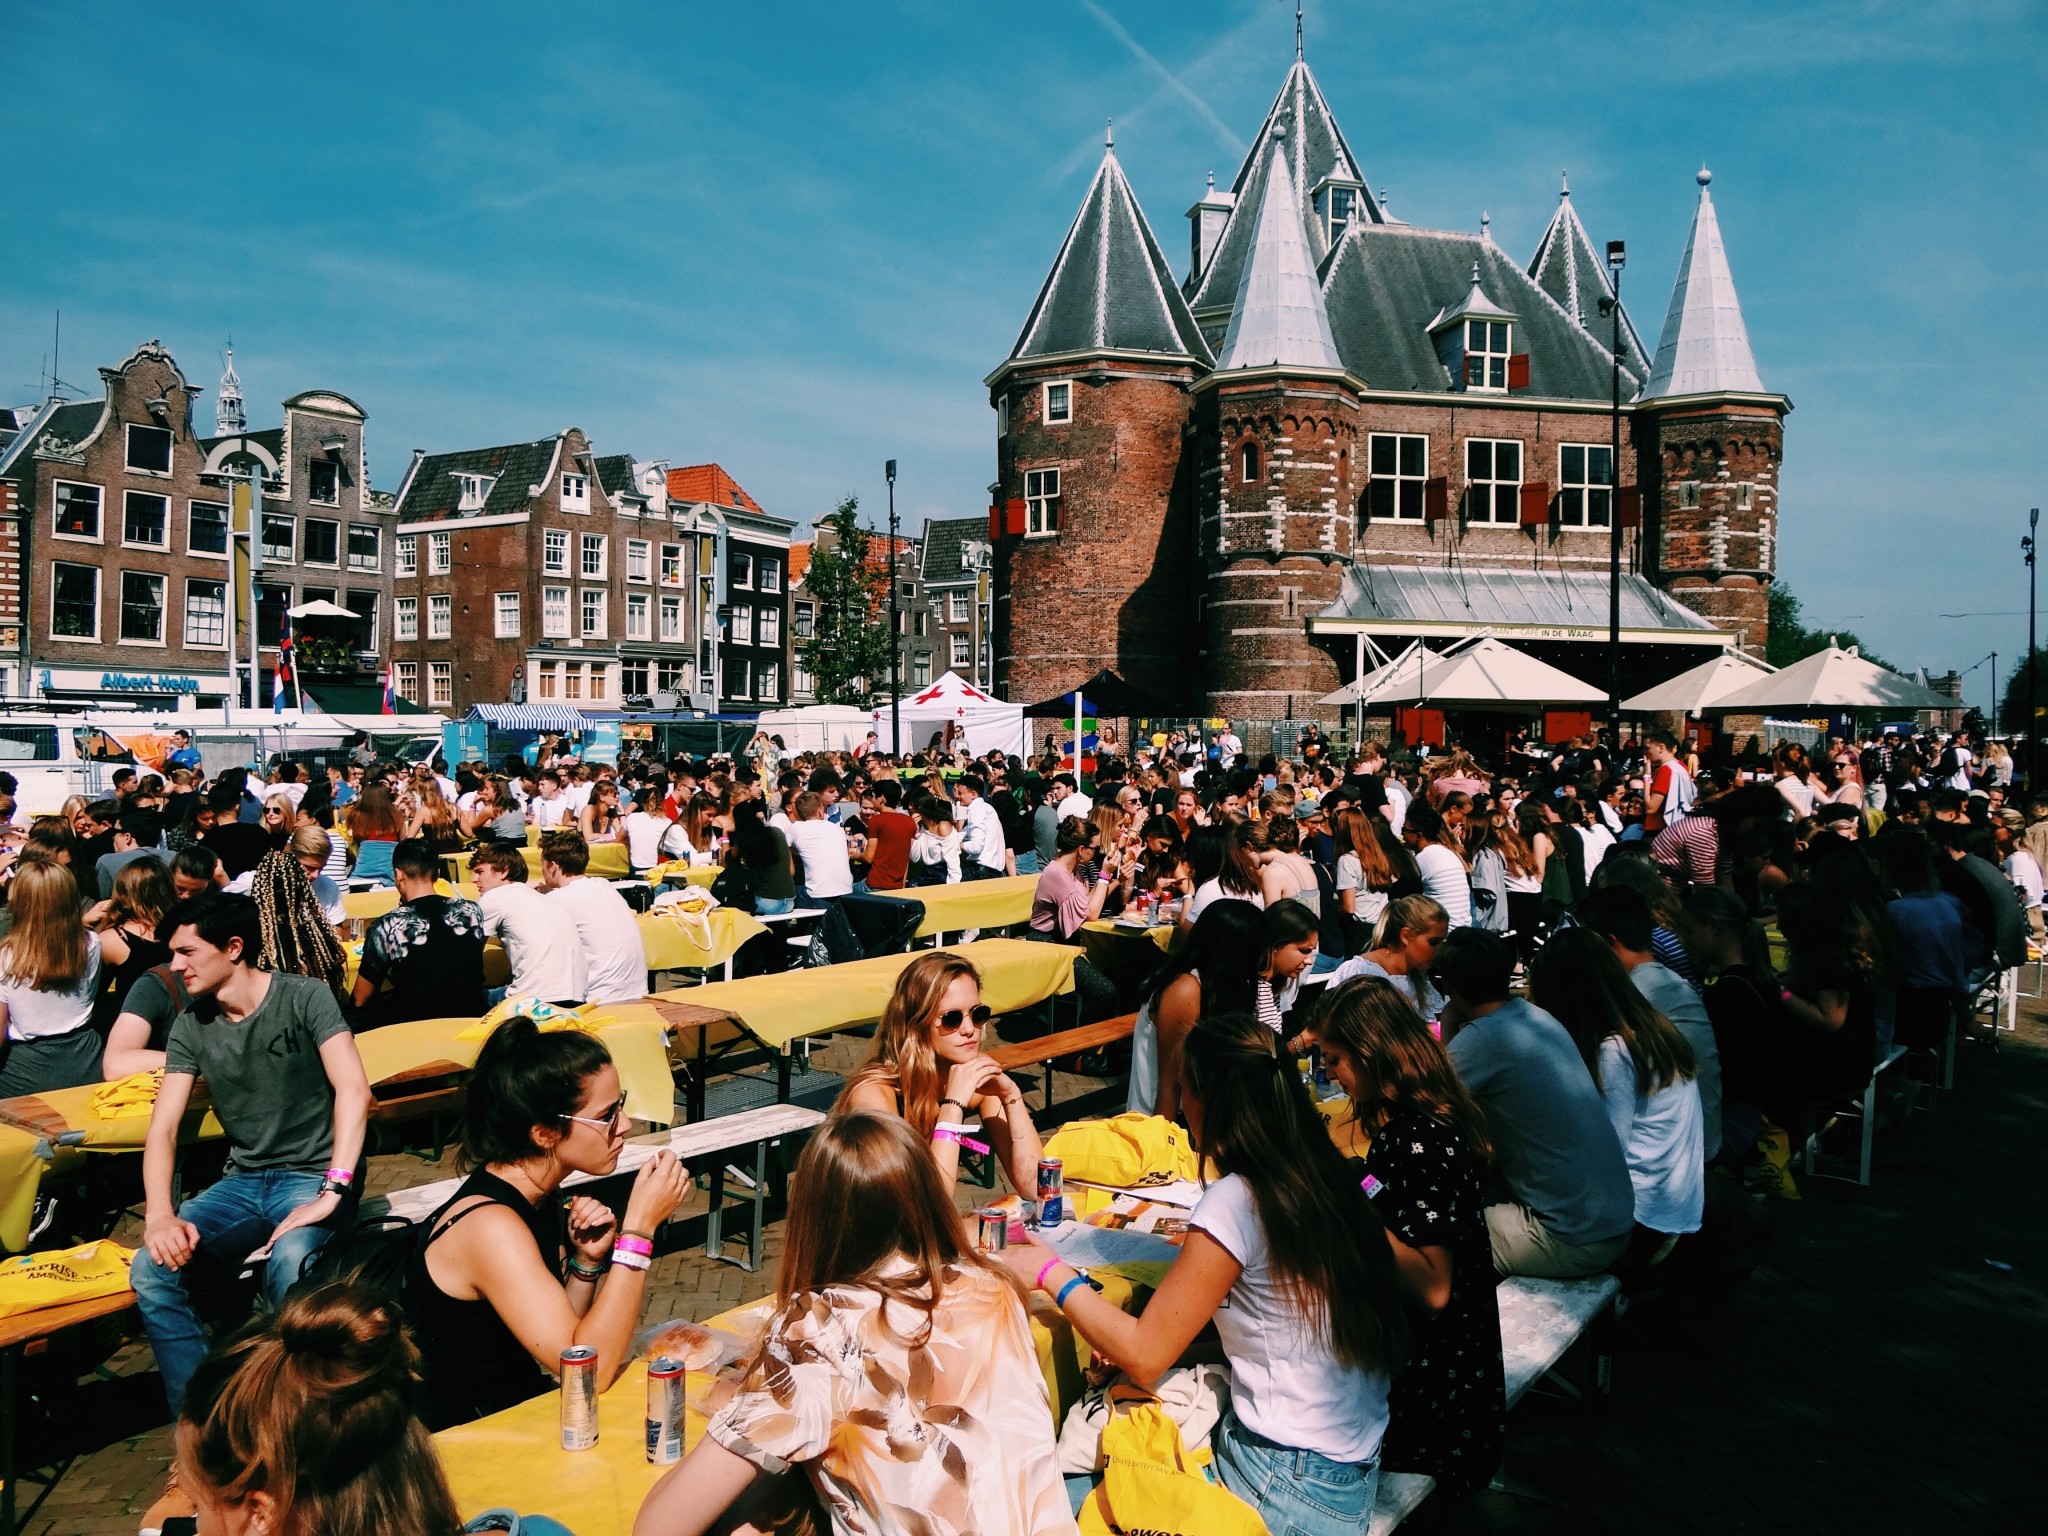 A photo of hundreds of students at an event during de Intreeweek at 'De Nieuwmarkt' in Amsterdam, The Netherlands